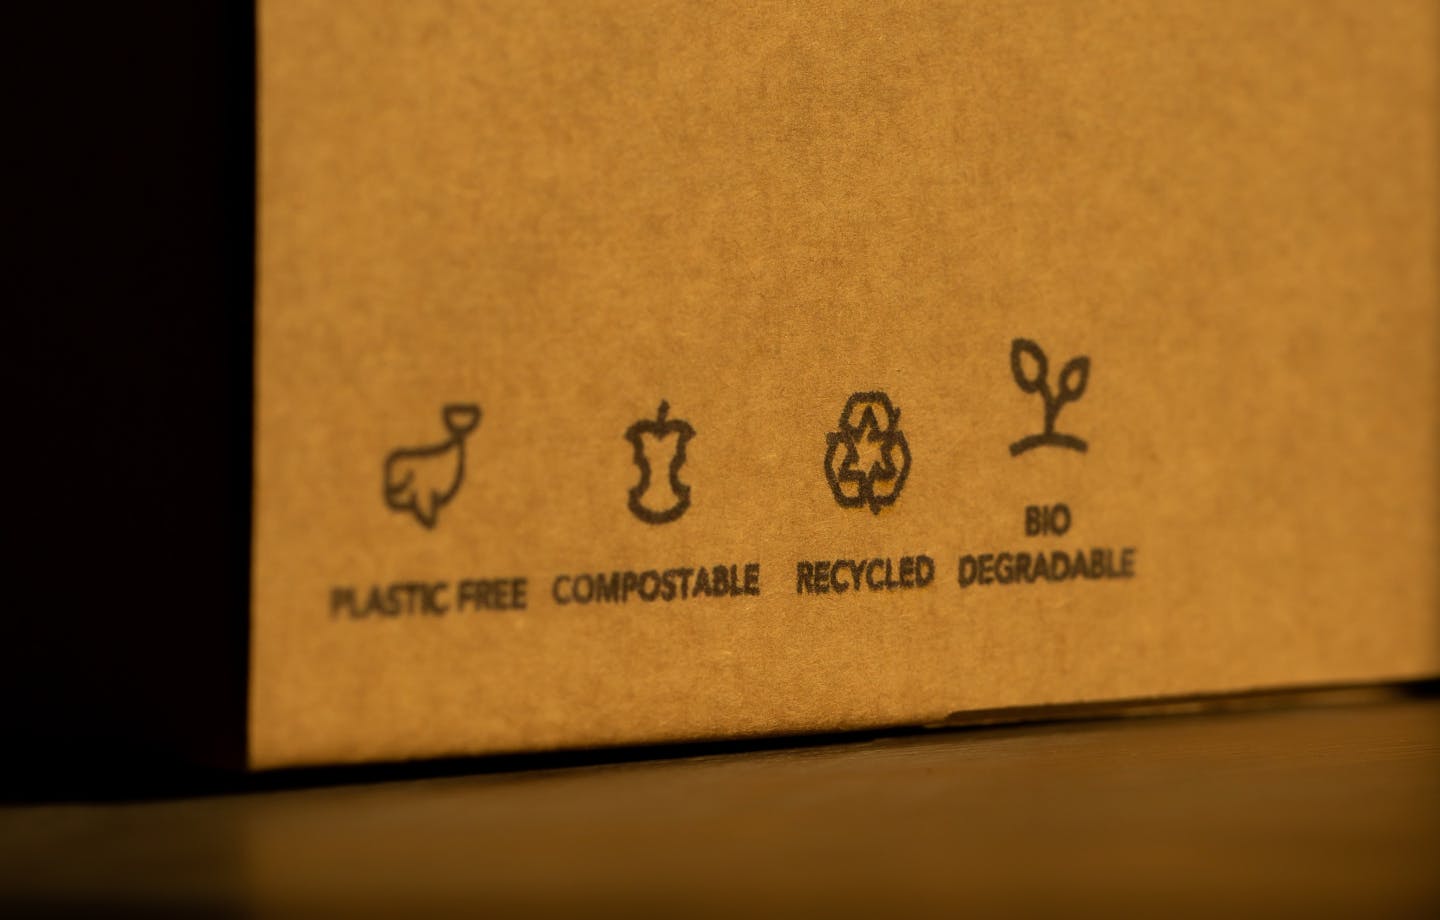 Plastic free, compostable, recycled, biodegradable